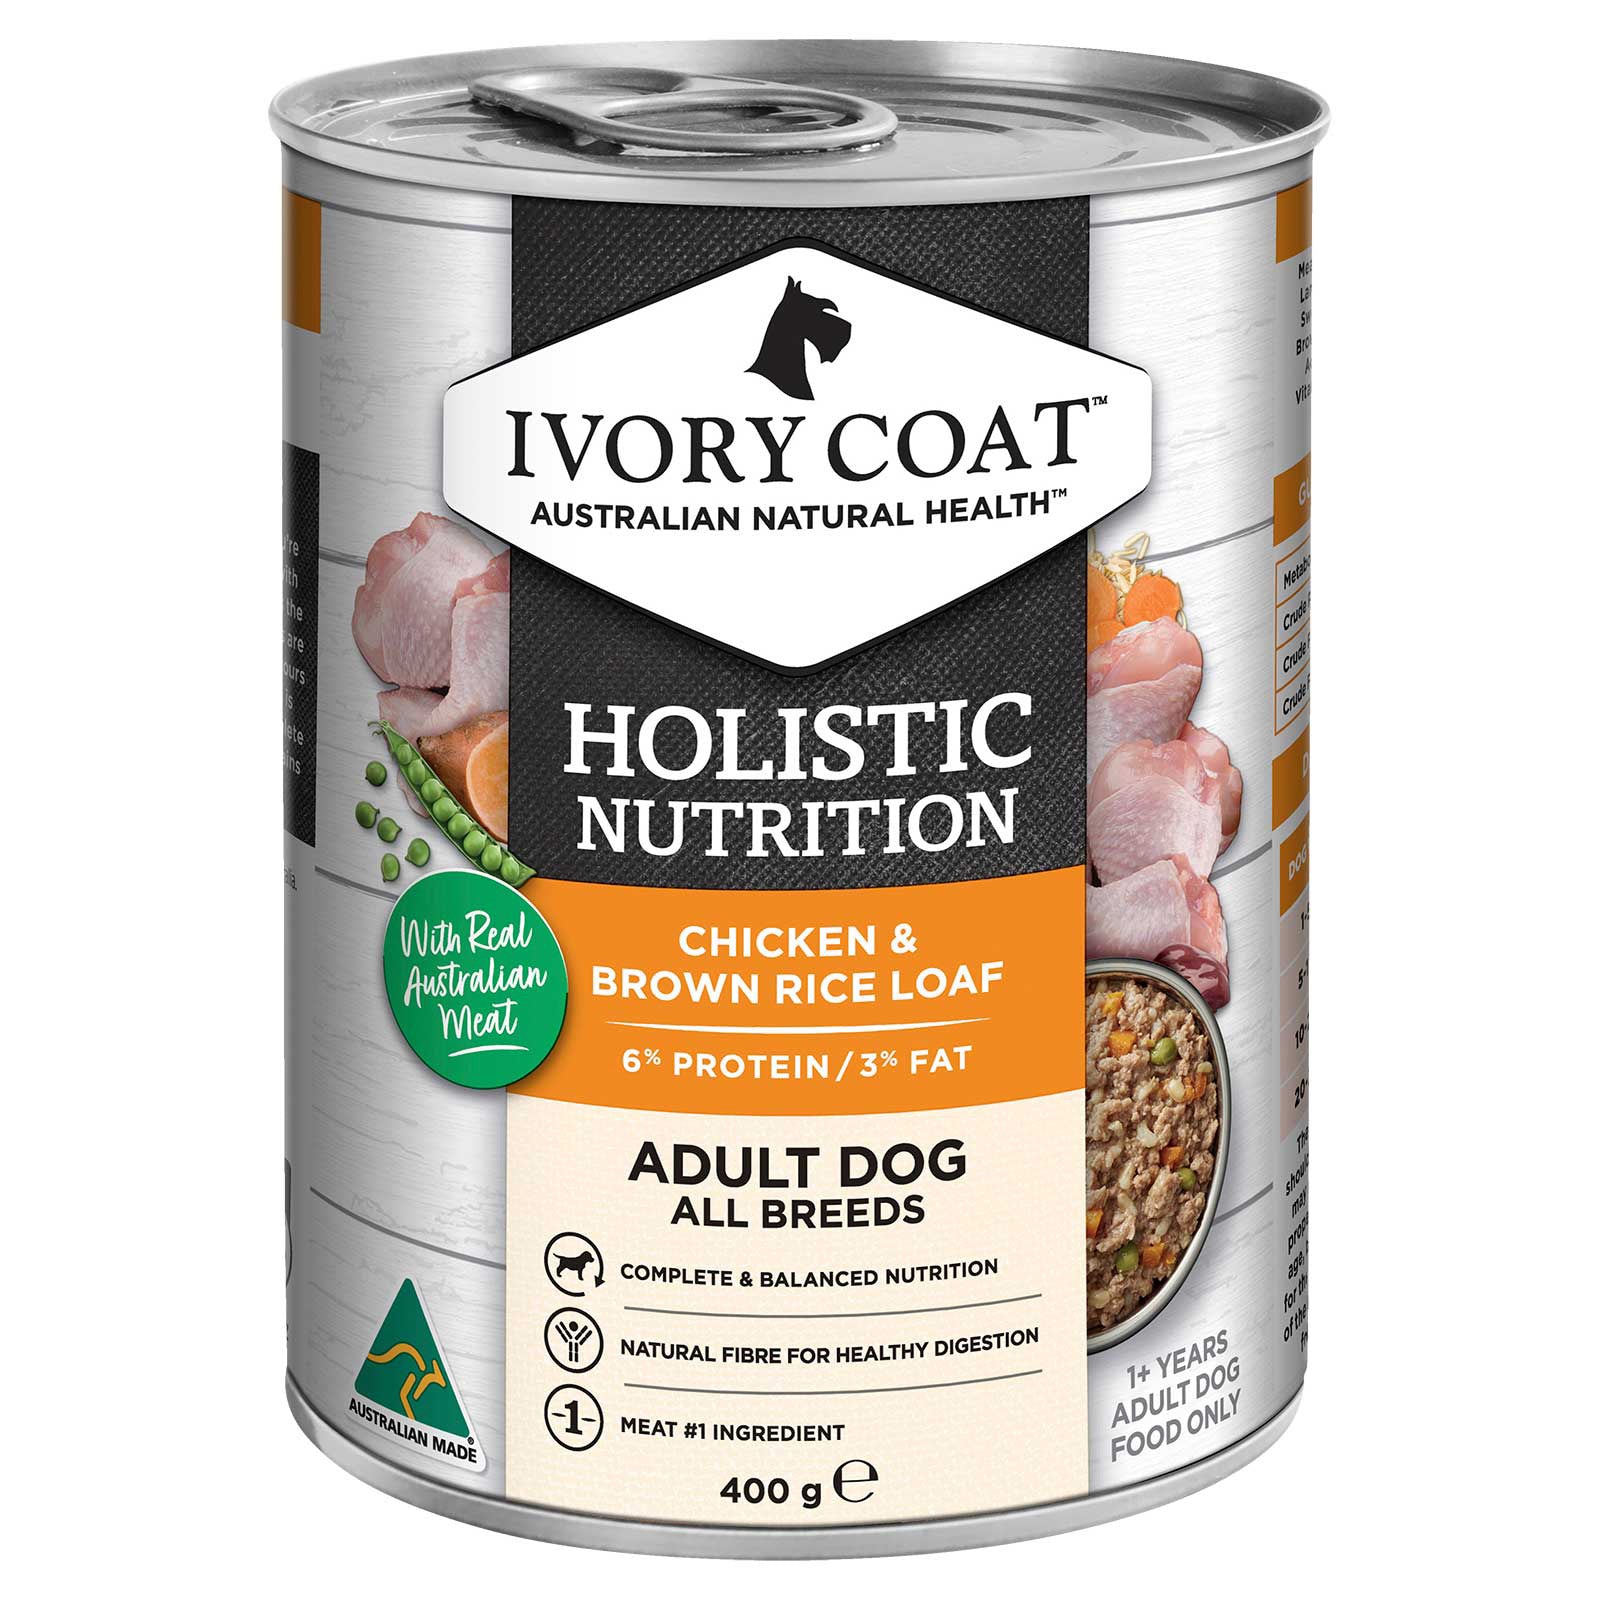 Ivory Coat Dog Food Can Adult Chicken & Brown Rice Loaf